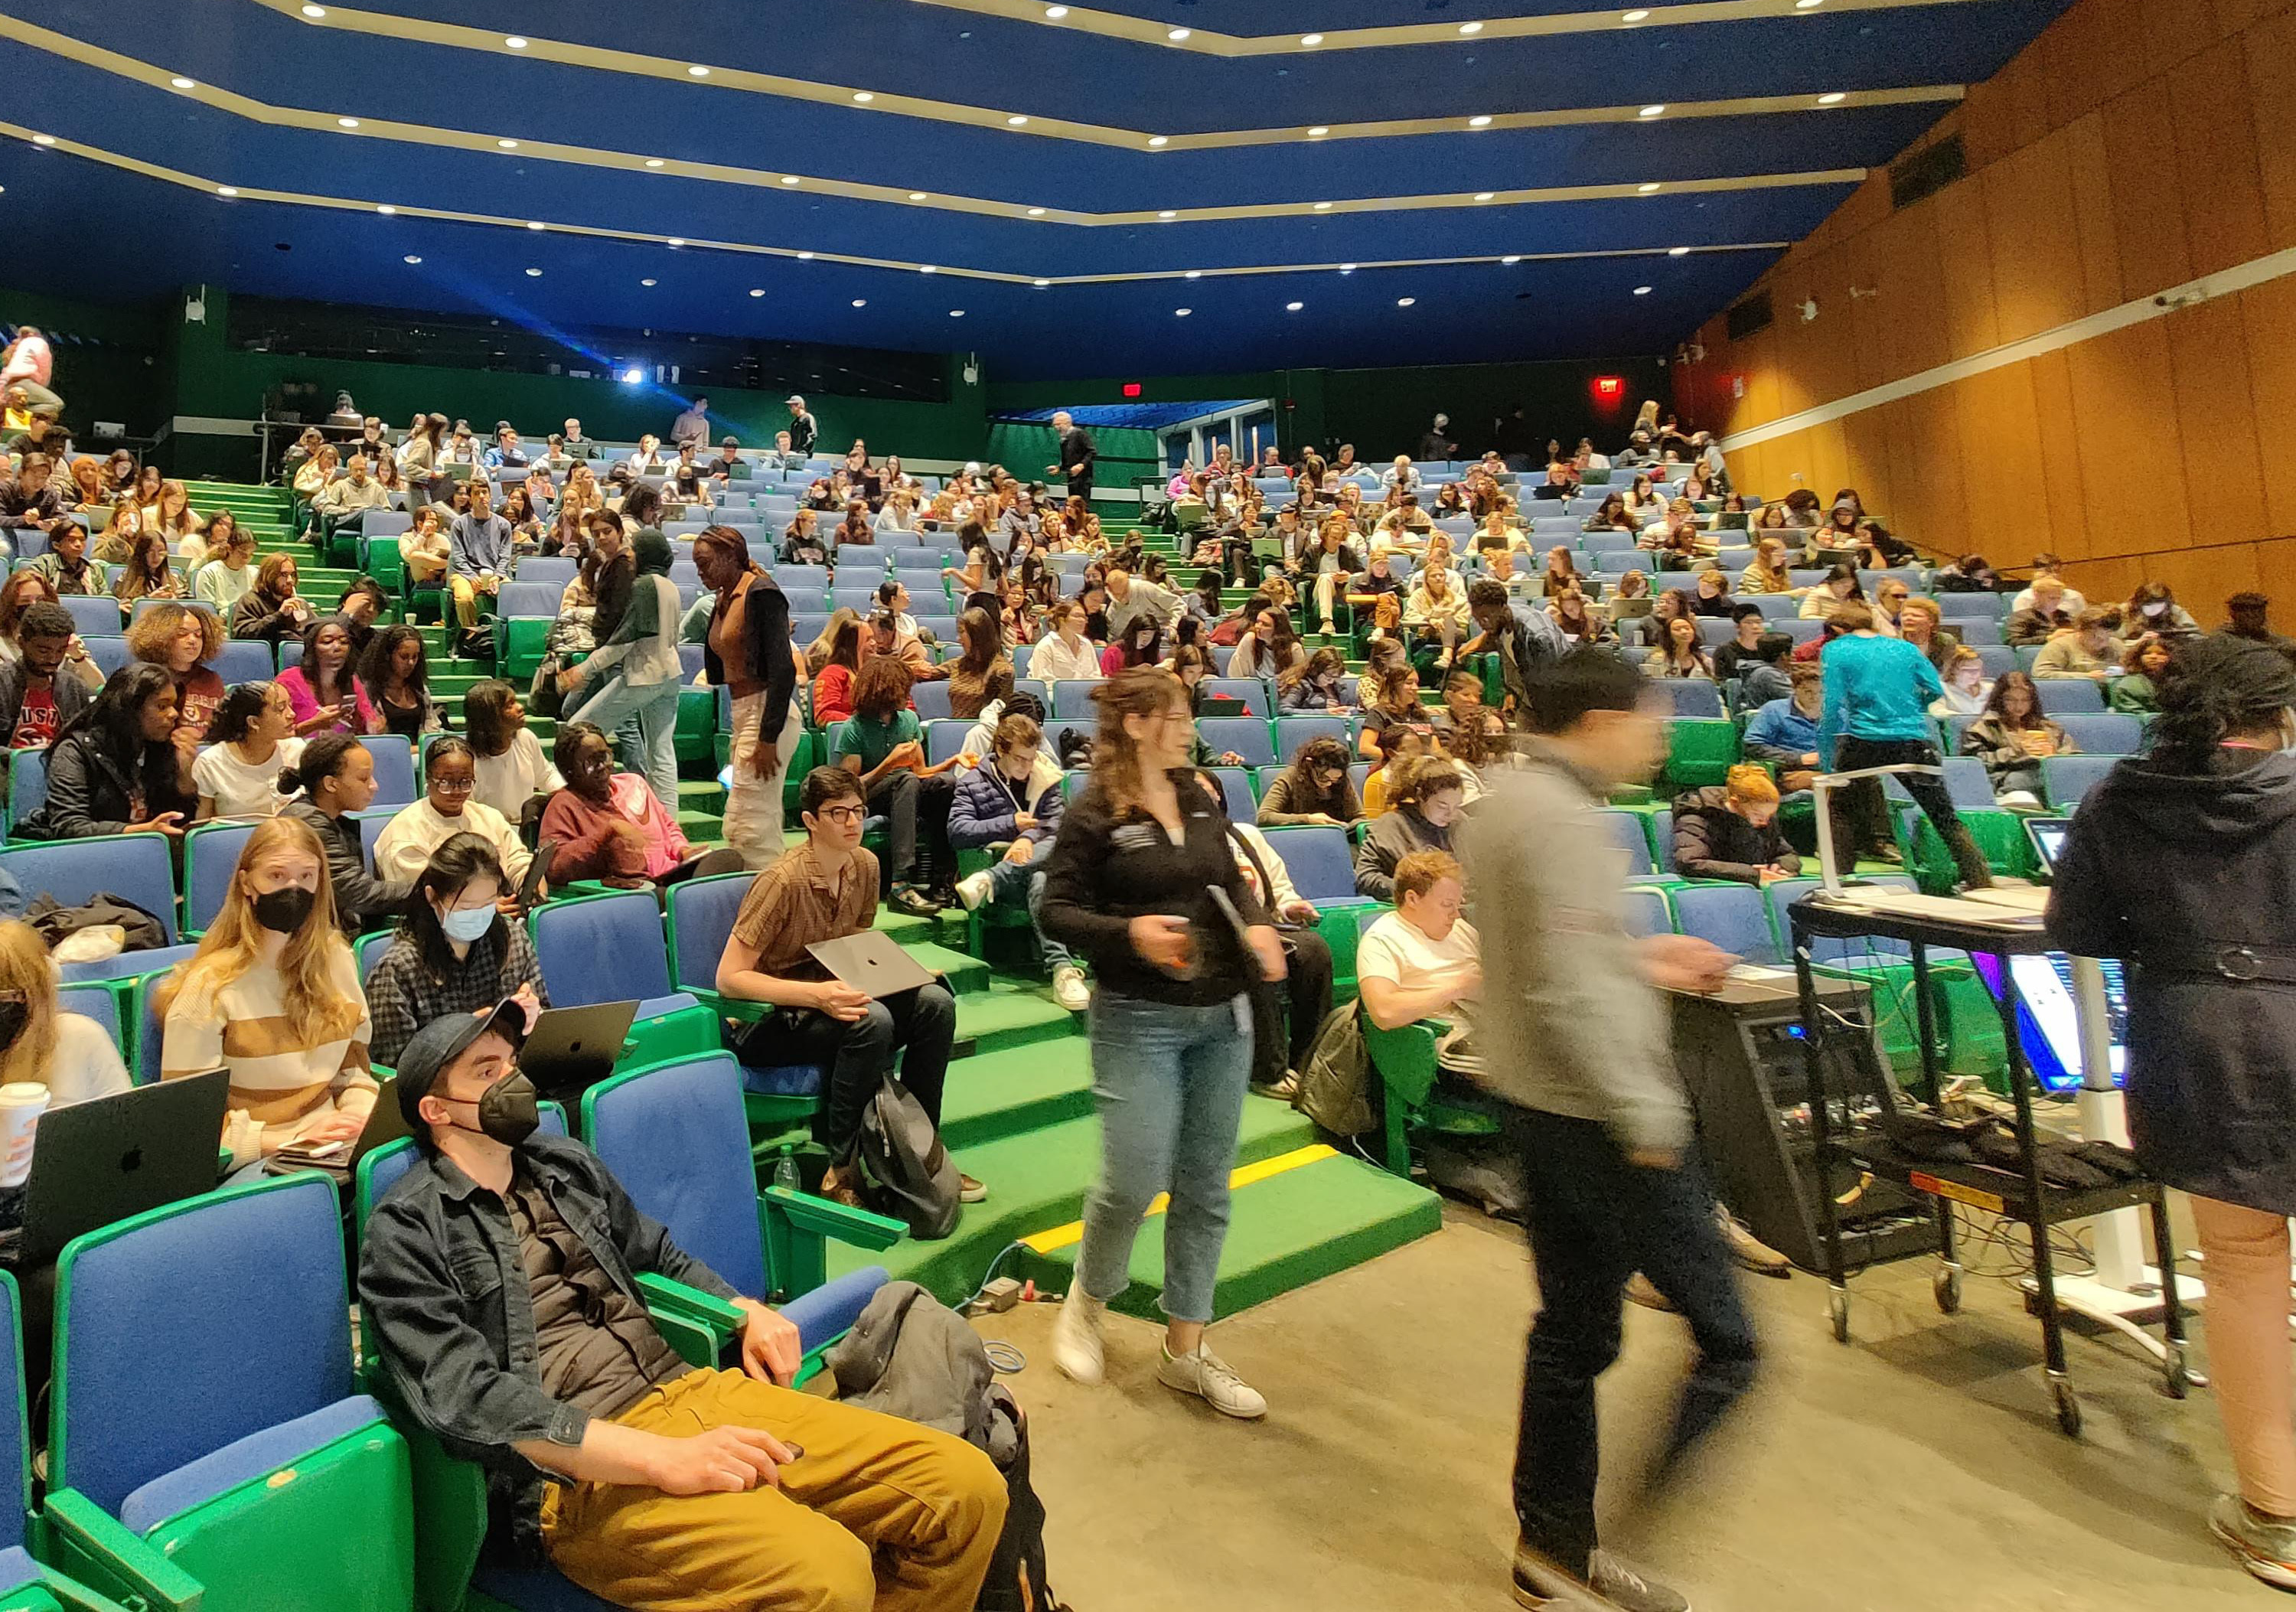 A large lecture hall with blue seats and green carpeting on each tier. Lots of movement going on: some students are still filing in, while others are sitting with their laptops or talking to each other.